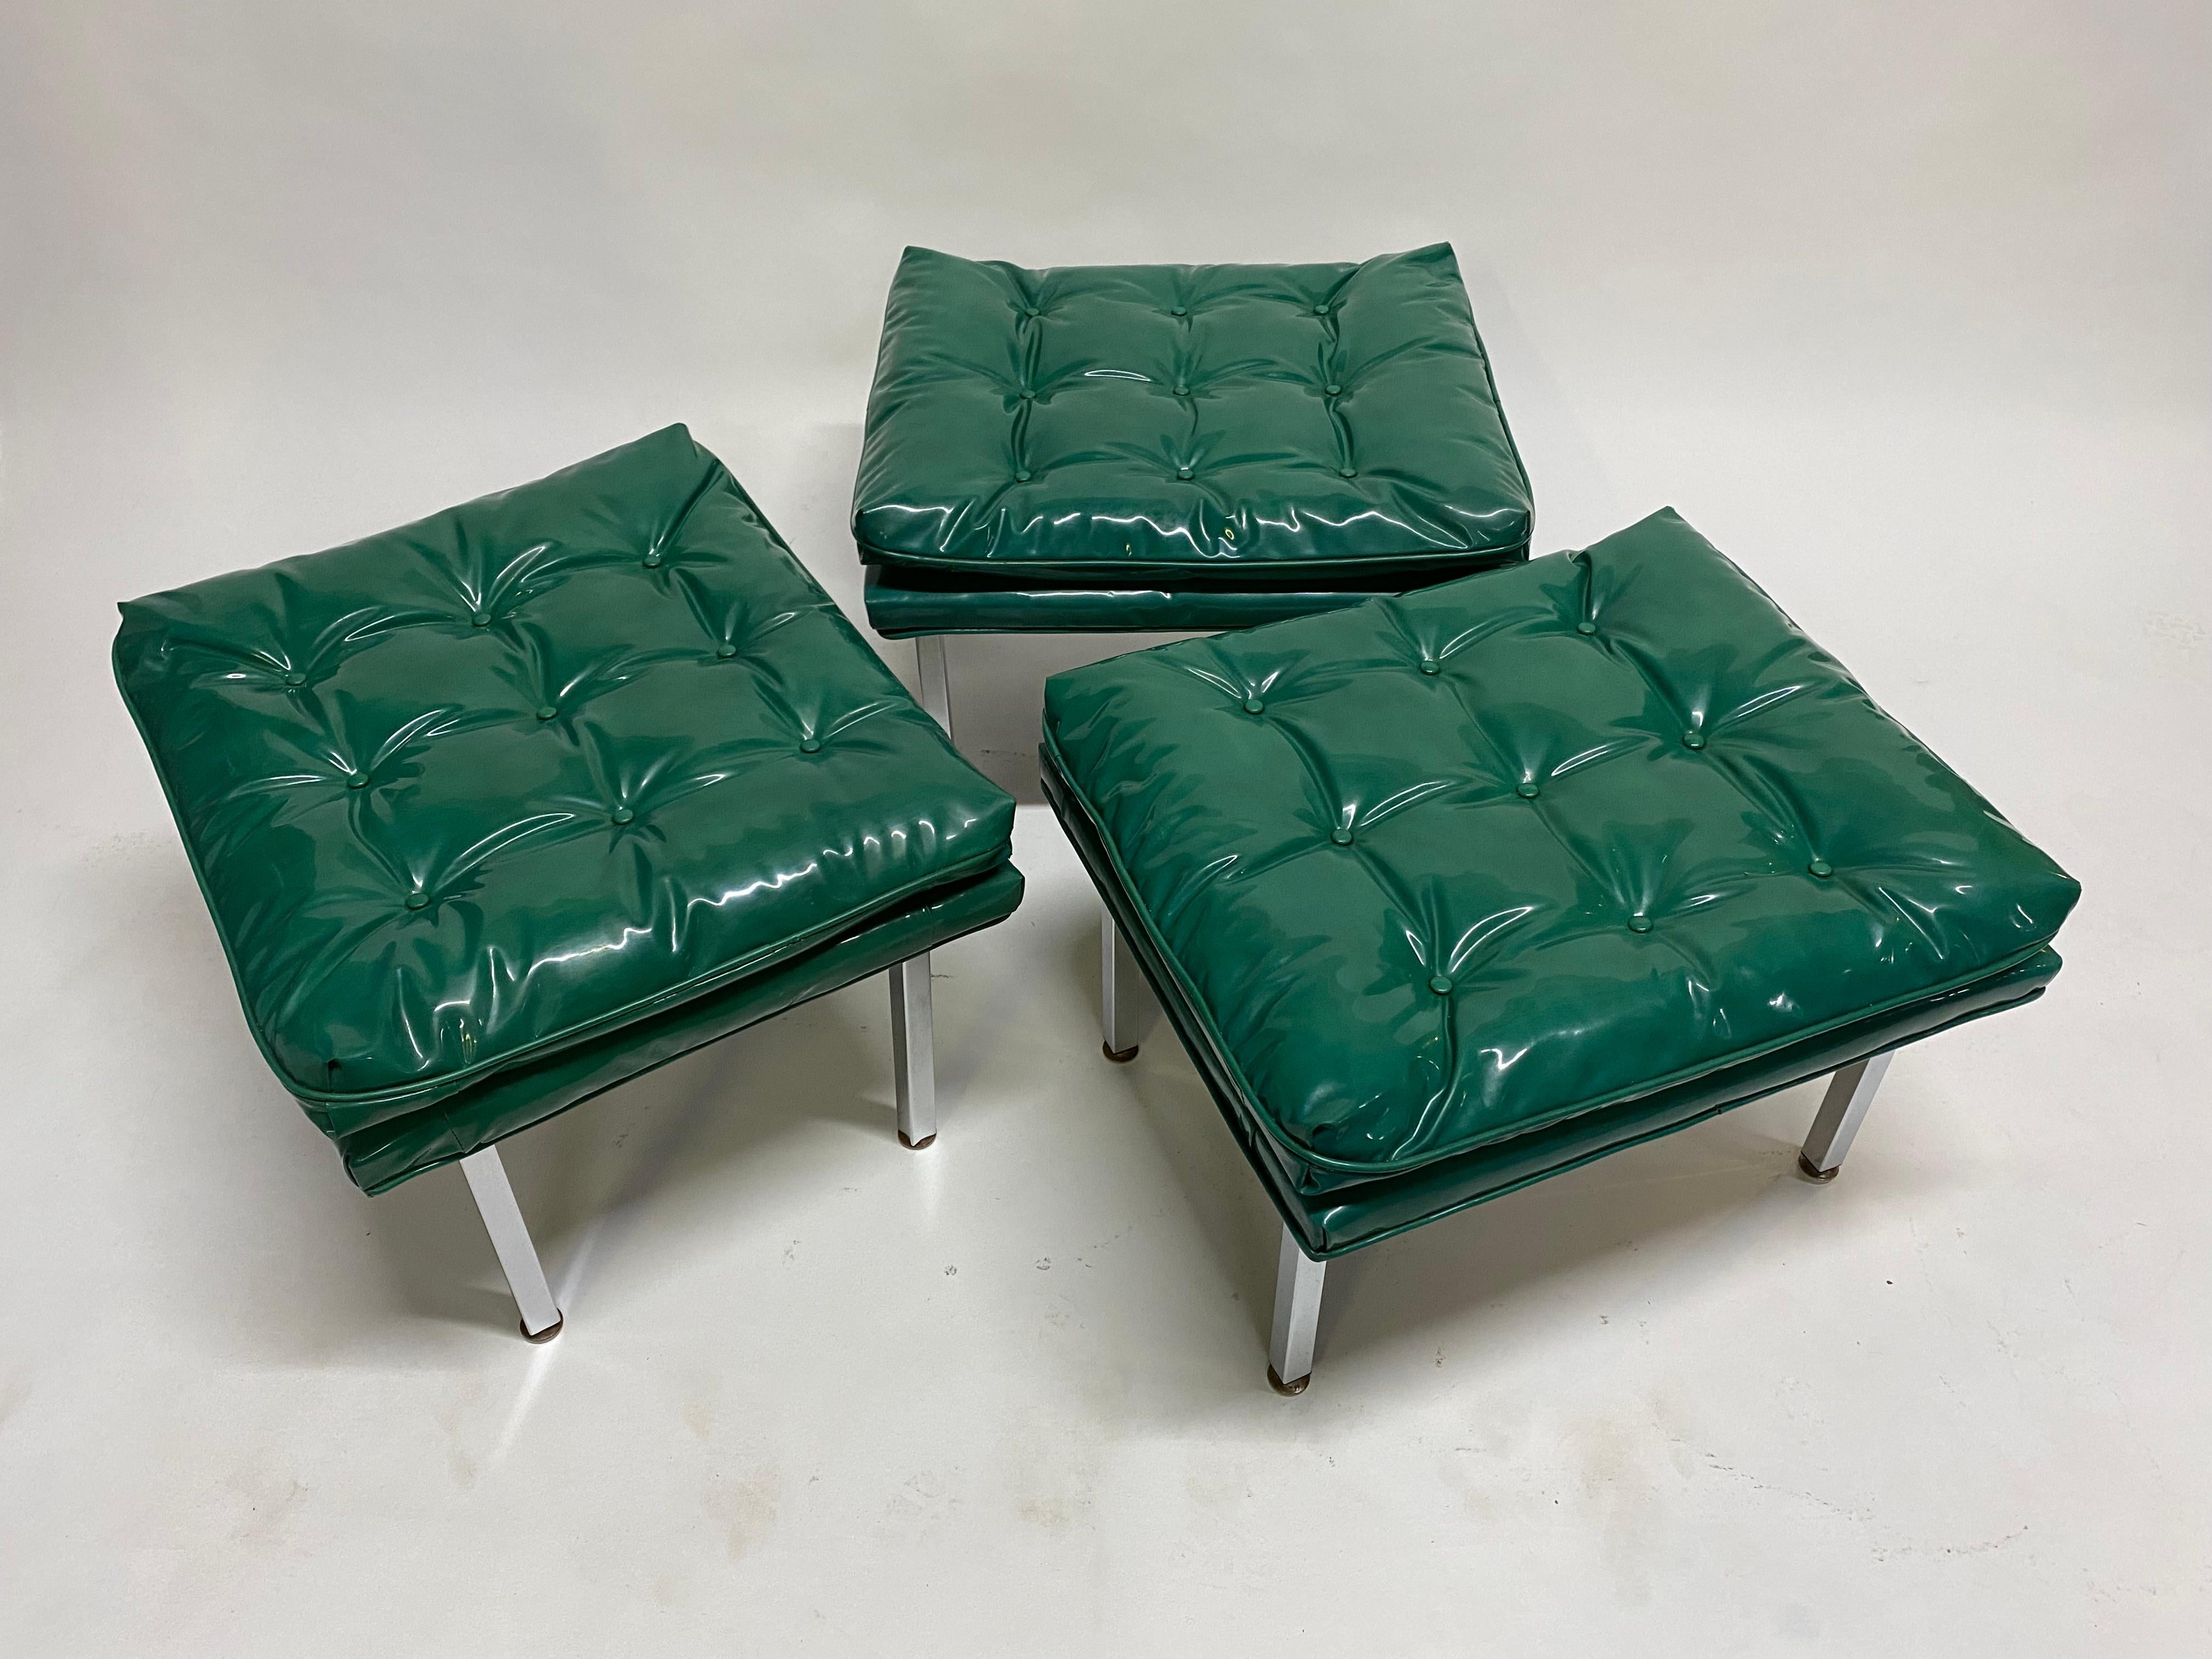 American Mid-Century Modern Glossy Tufted Kelly Green Upholstered Stools, Set of Three